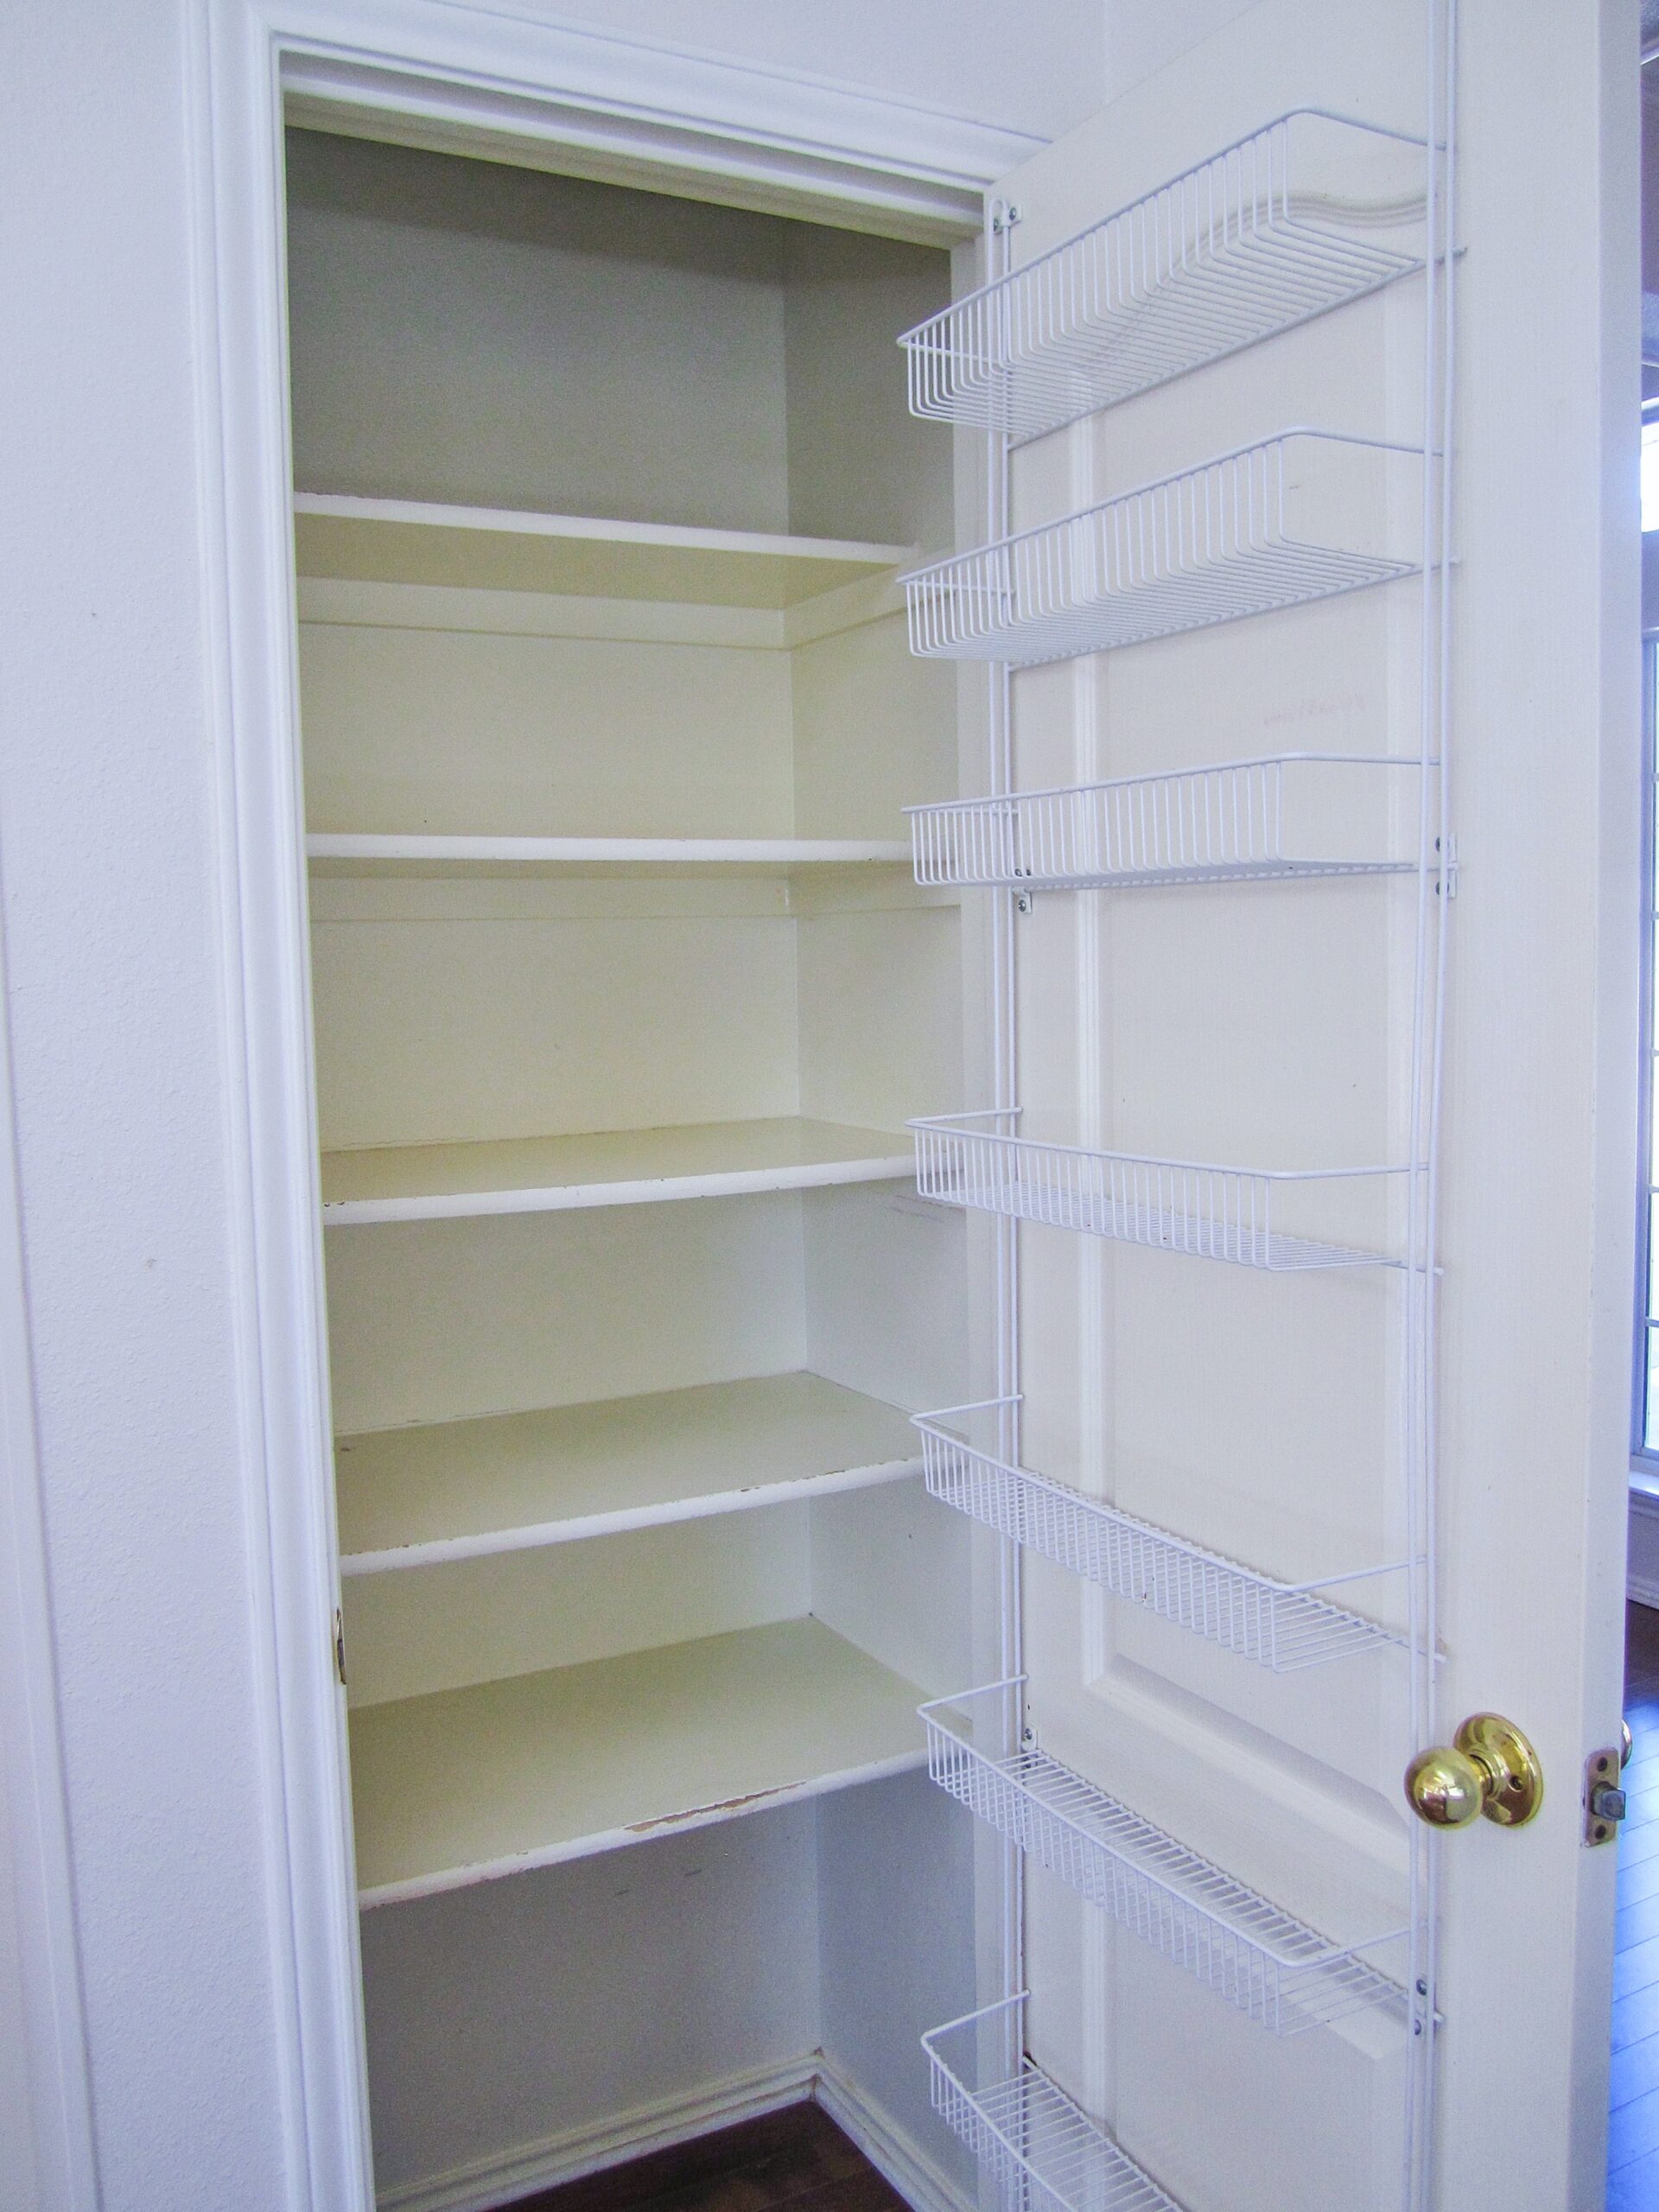 pantry makeover before and after - before